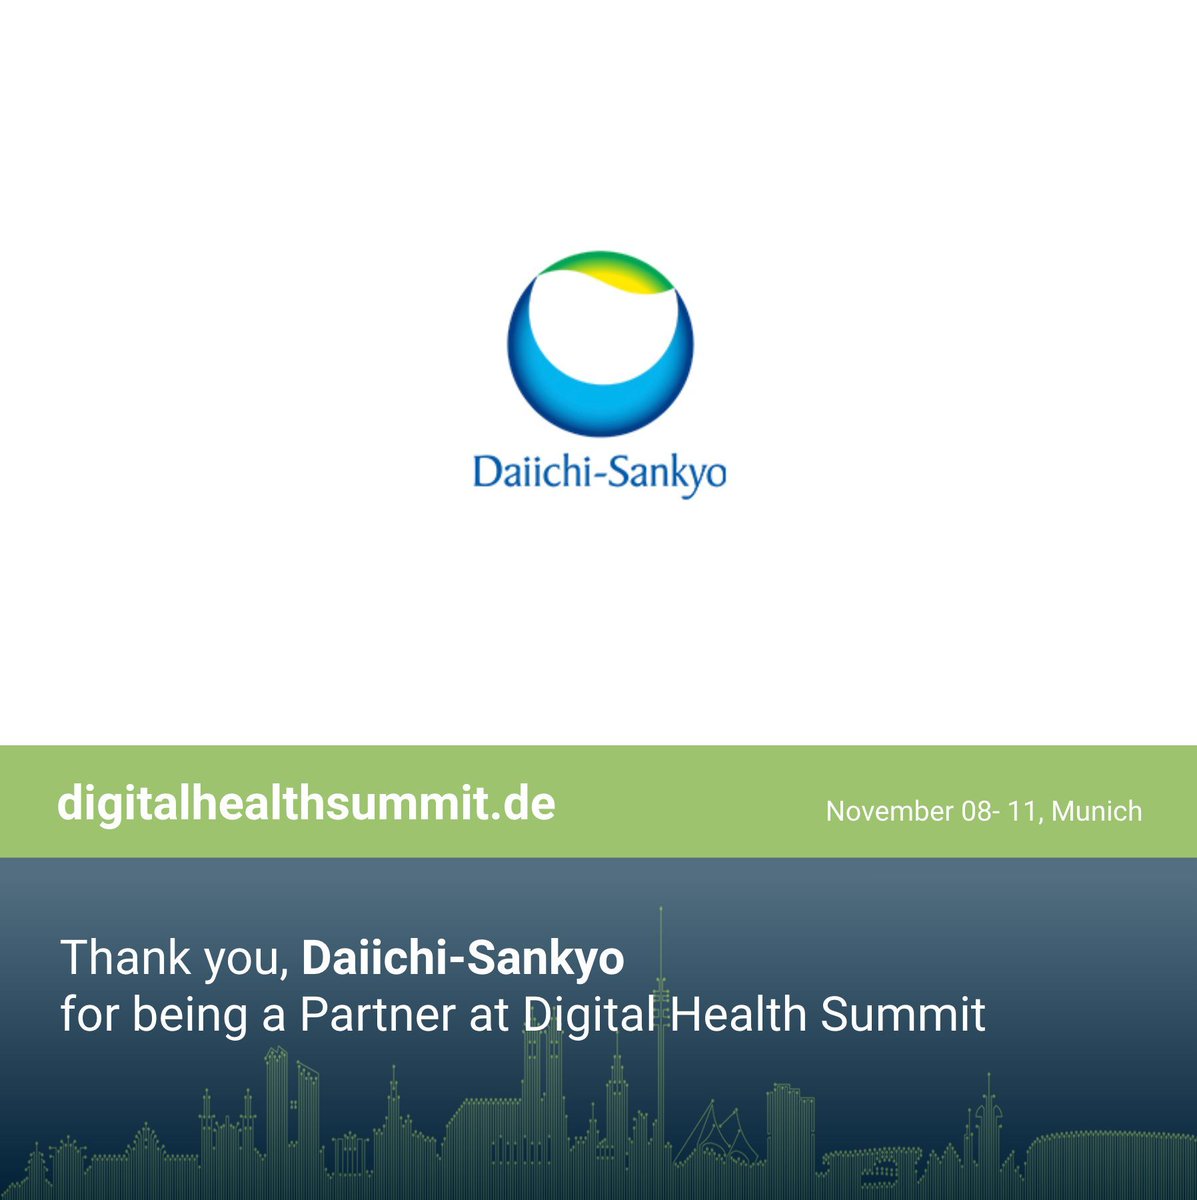 Meet our Partner Daiichi-Sankyo at the DHS23 in Munich! 
Register on our Website and get your Tickets: buff.ly/2GUr57o 

#dhsmuc #DHS23